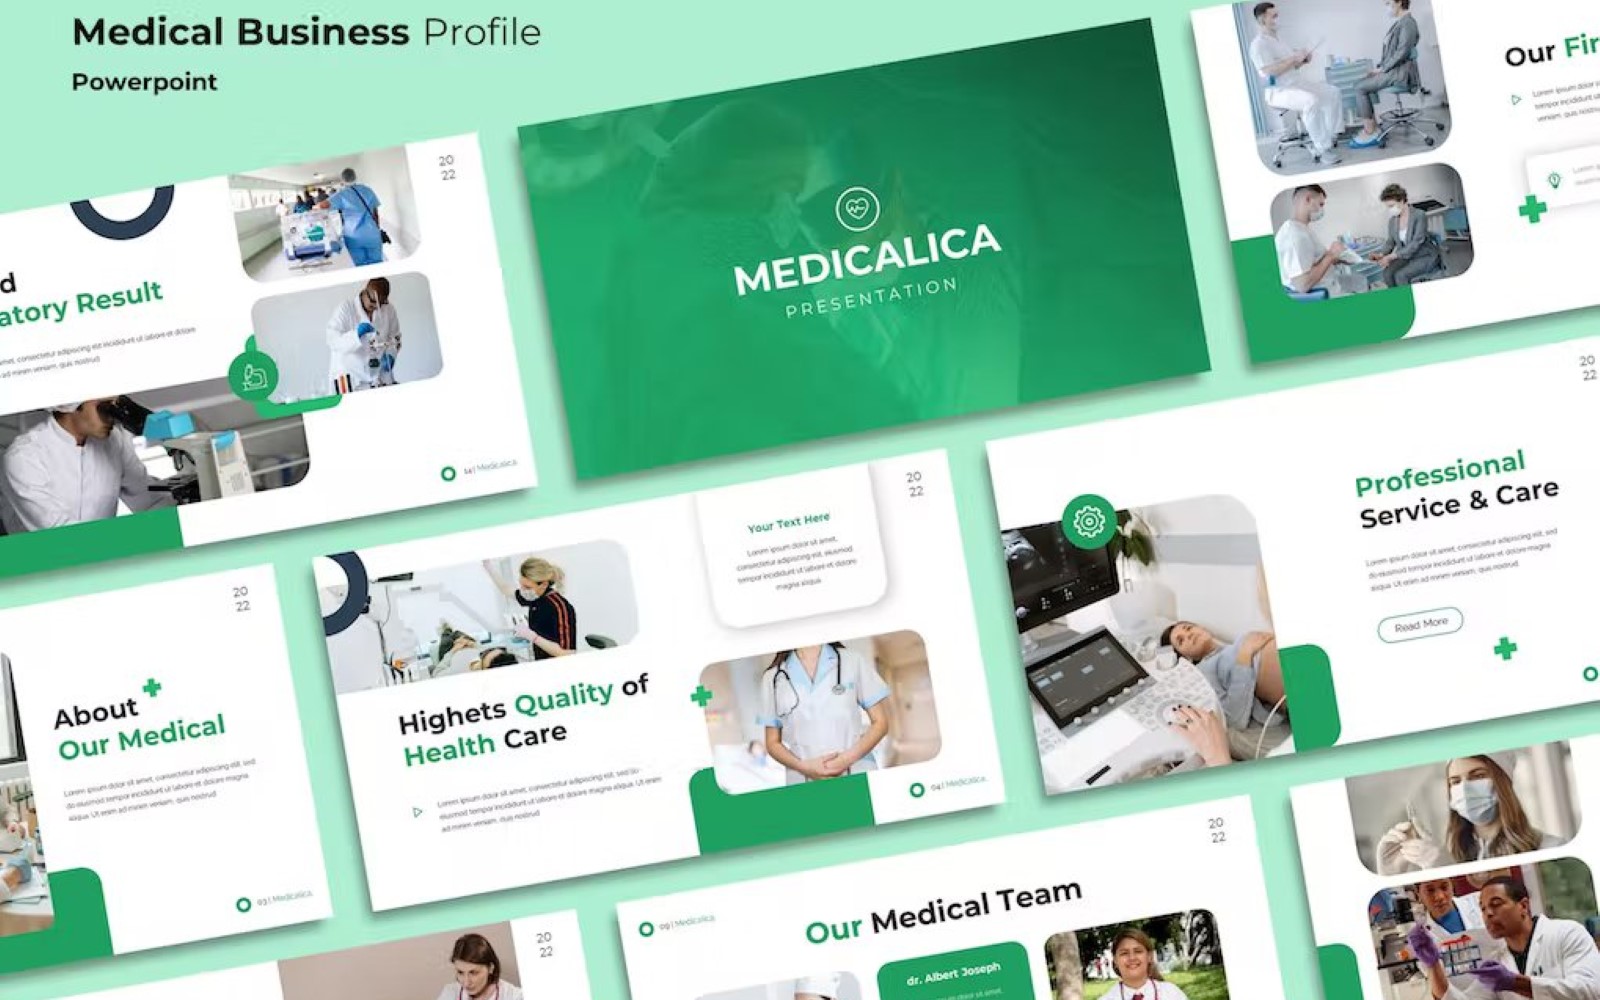 Medical Business Profile Powerpoint